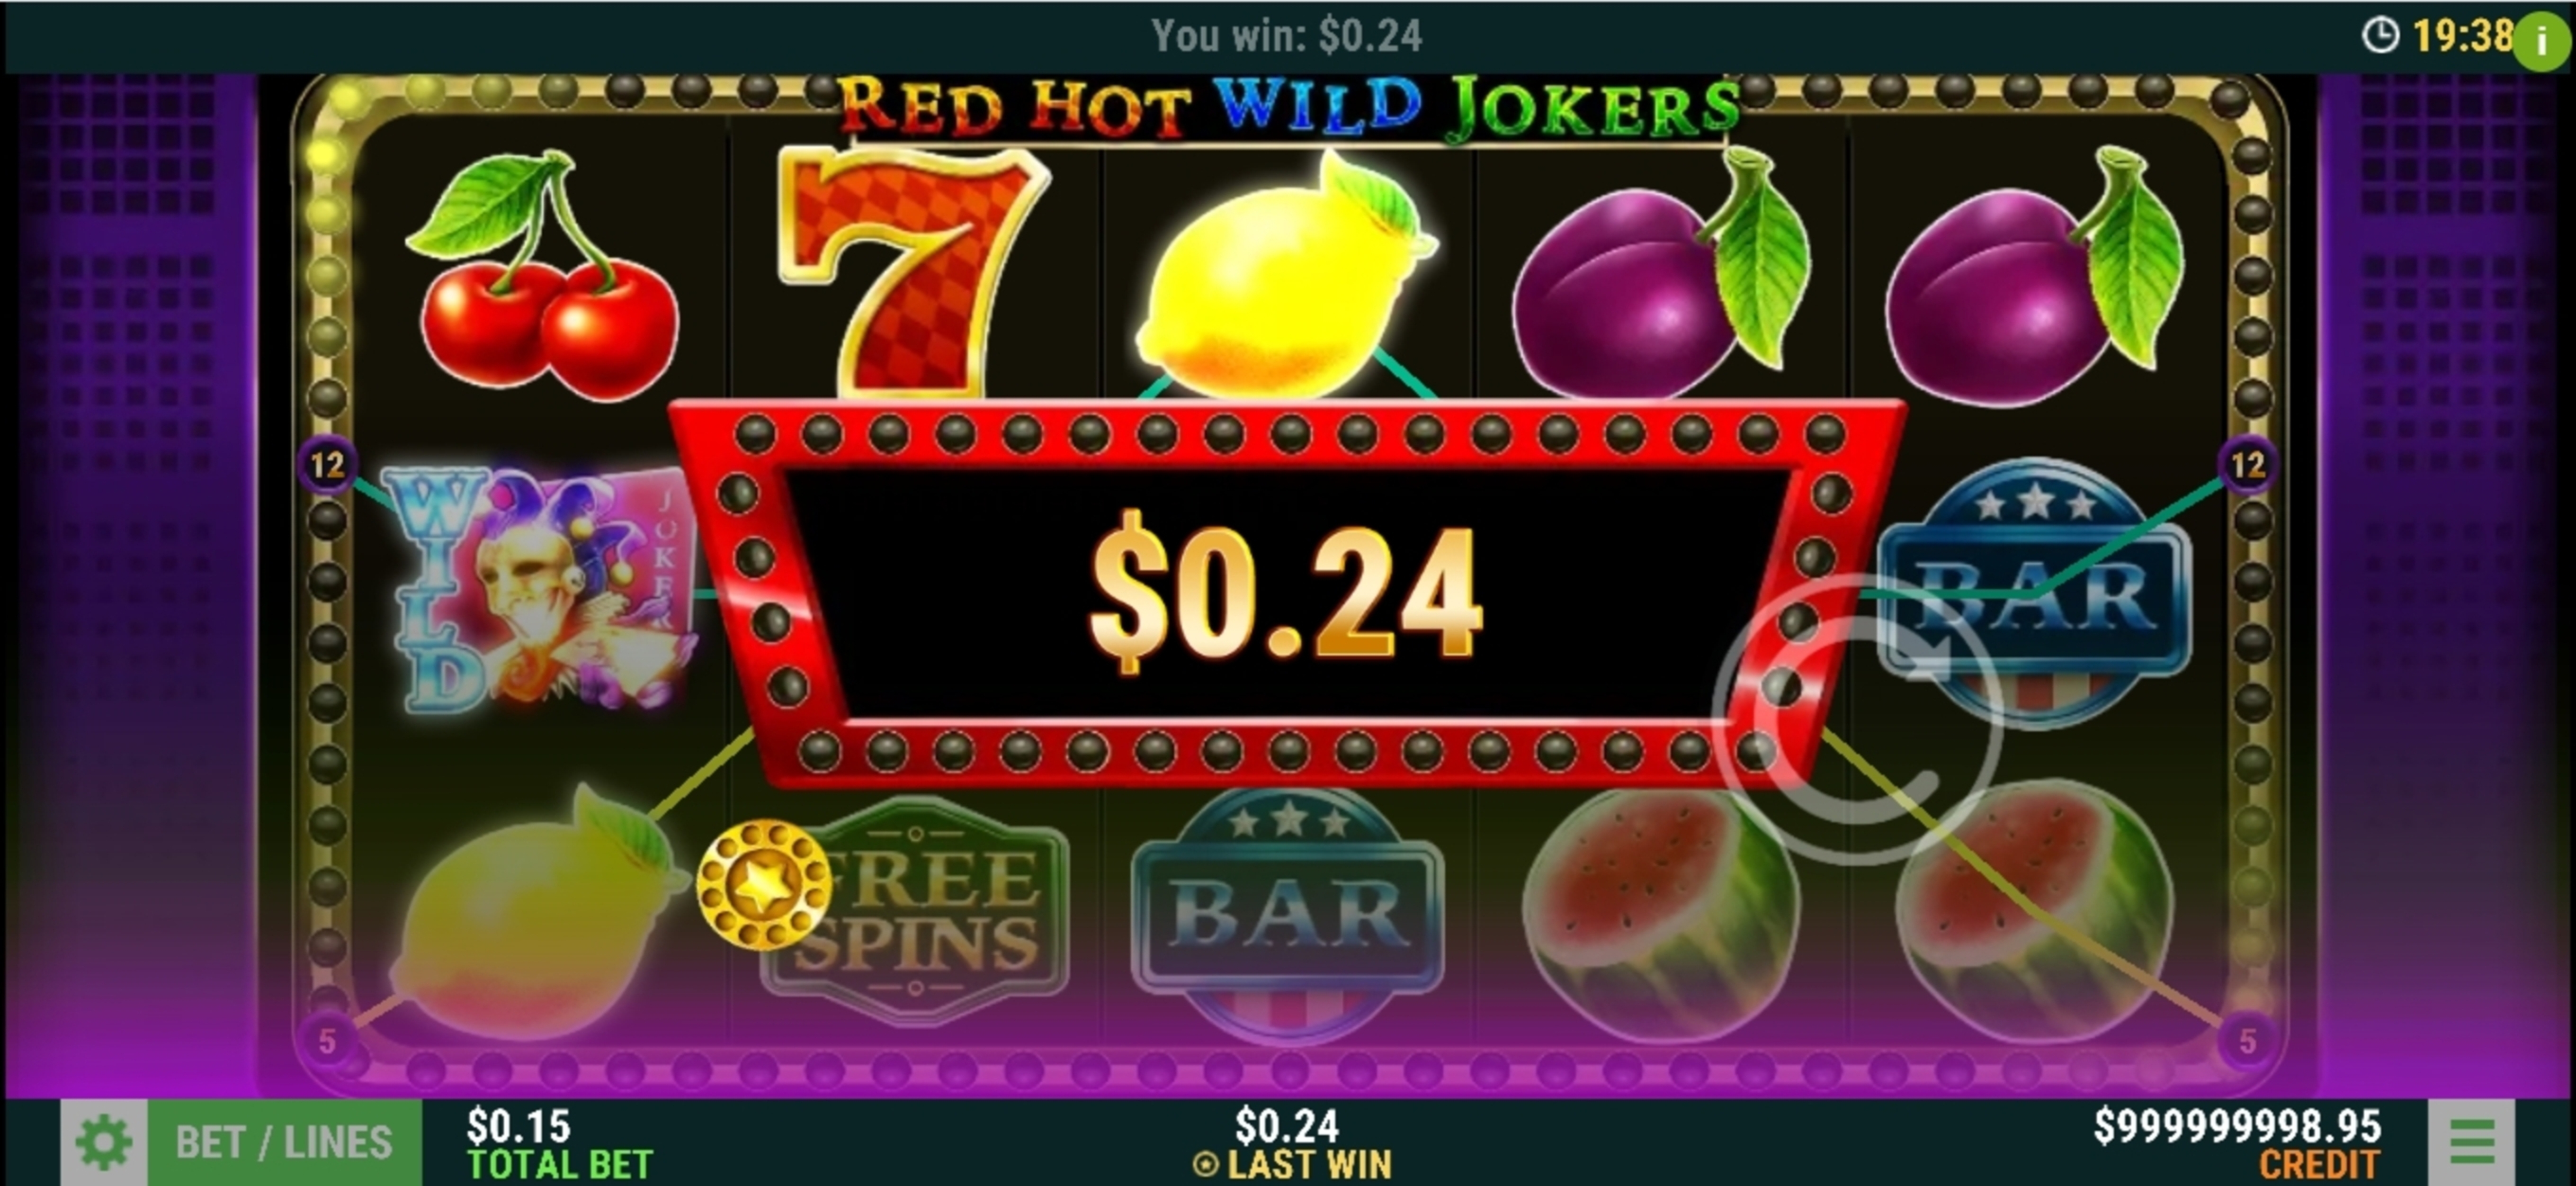 Win Money in Red Hot Wild Jokers Free Slot Game by Slot Factory